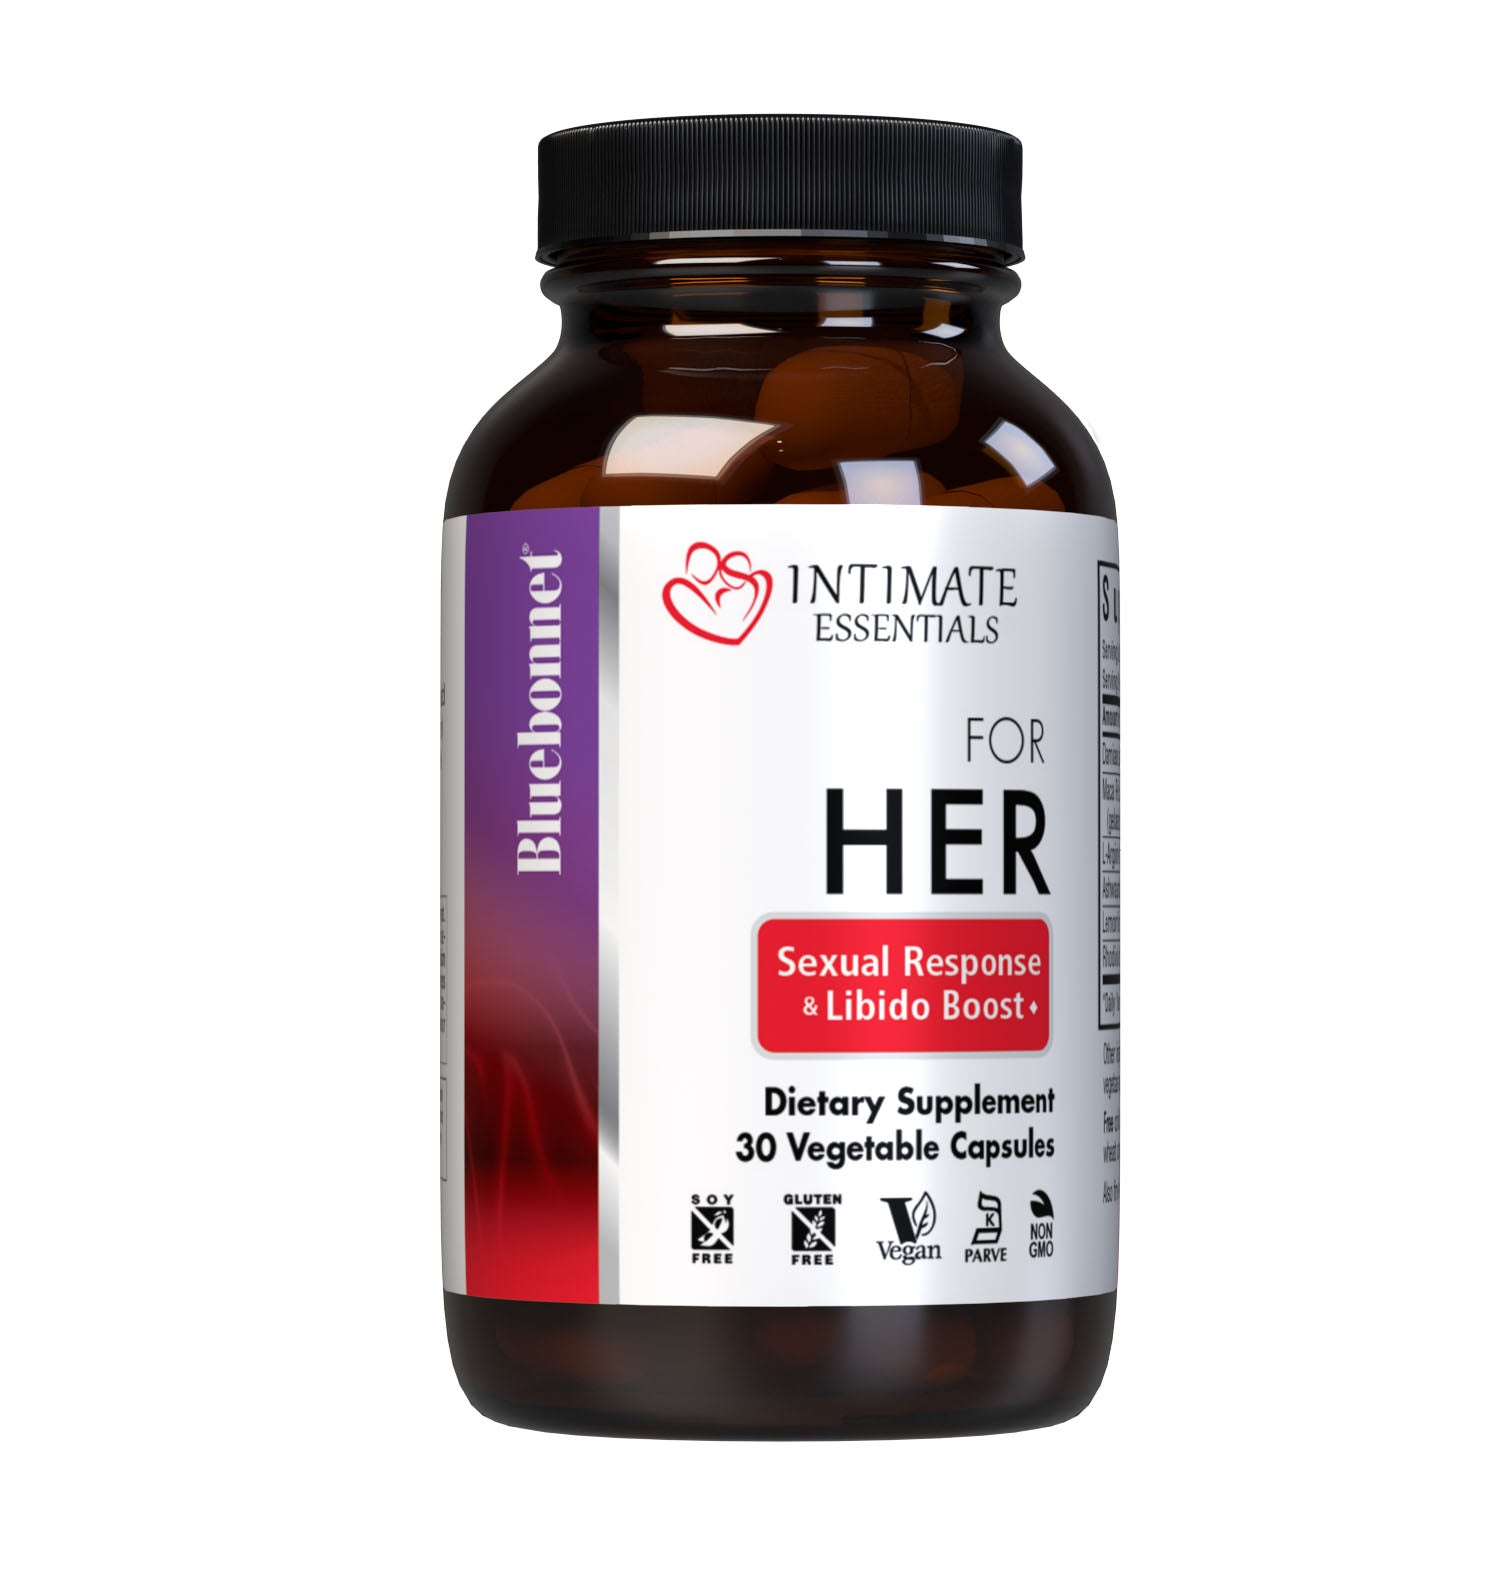 Bluebonnet’s Intimate Essentials For Her Sexual Response & Libido Boost Vegetable Capsules are specially formulated to help stimulate a woman’s sexual chemistry and intensify desire and libido. #size_30 count